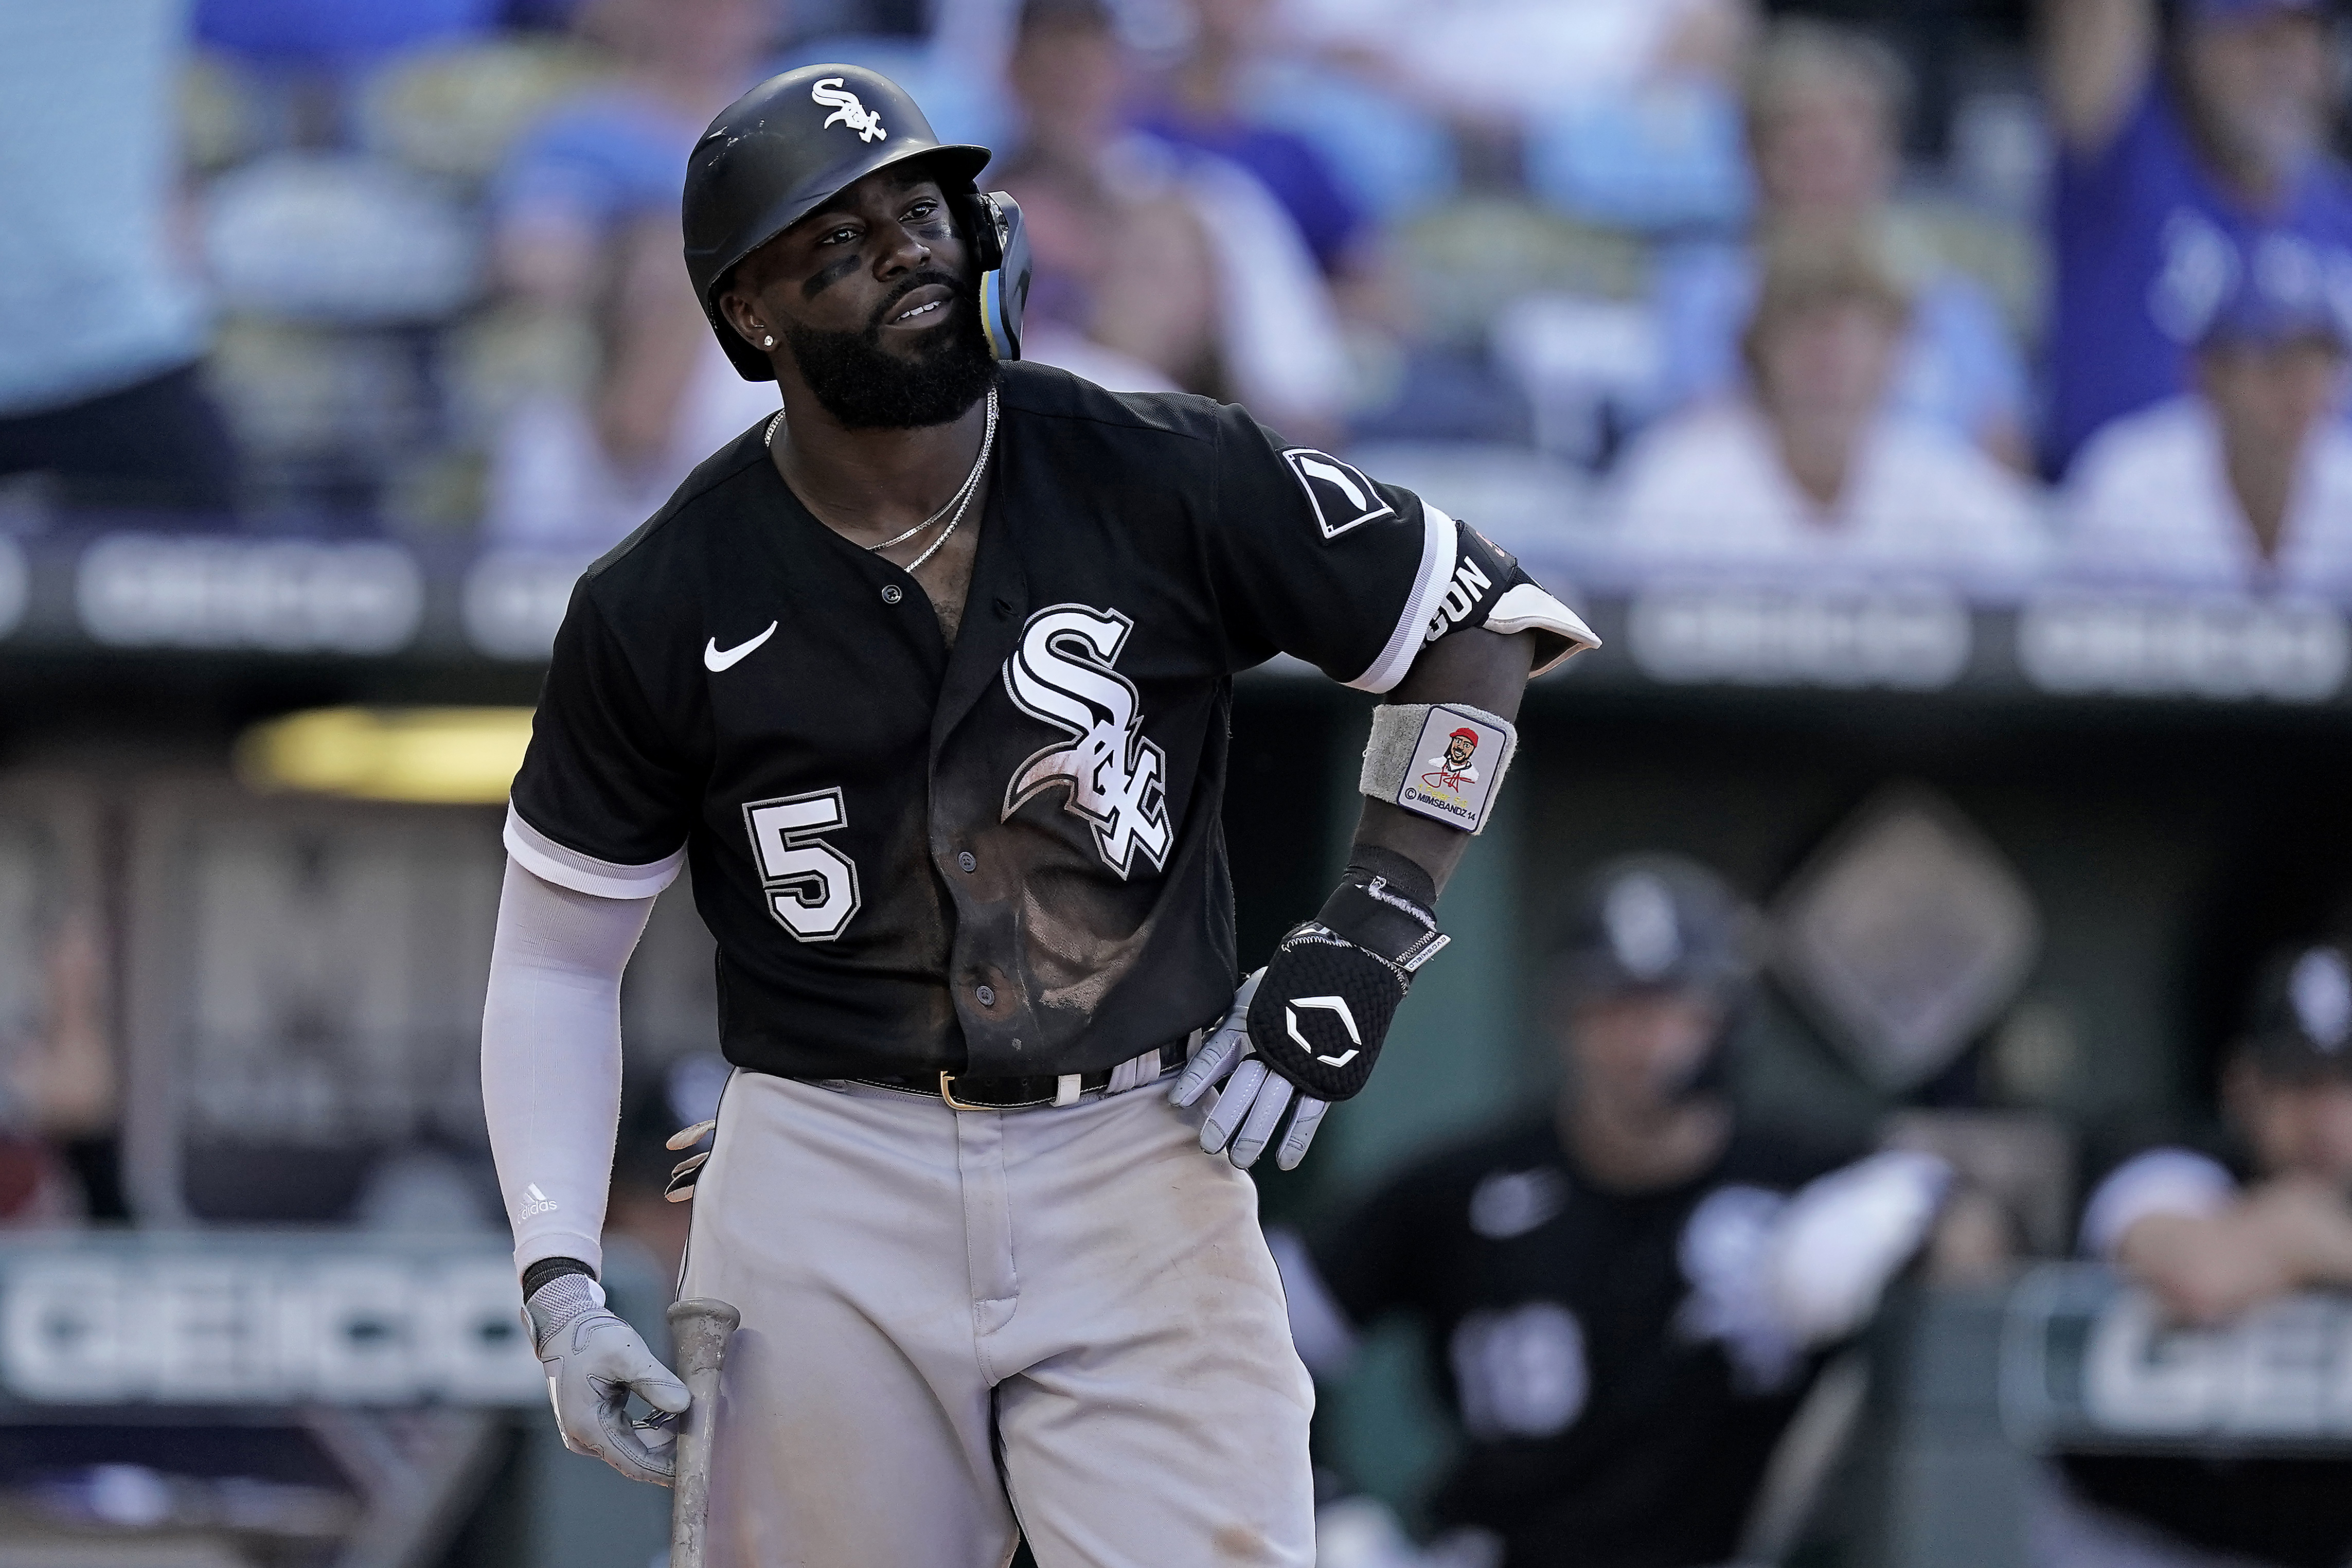 Doctor on White Sox player after cancer diagnosis - CBS Chicago